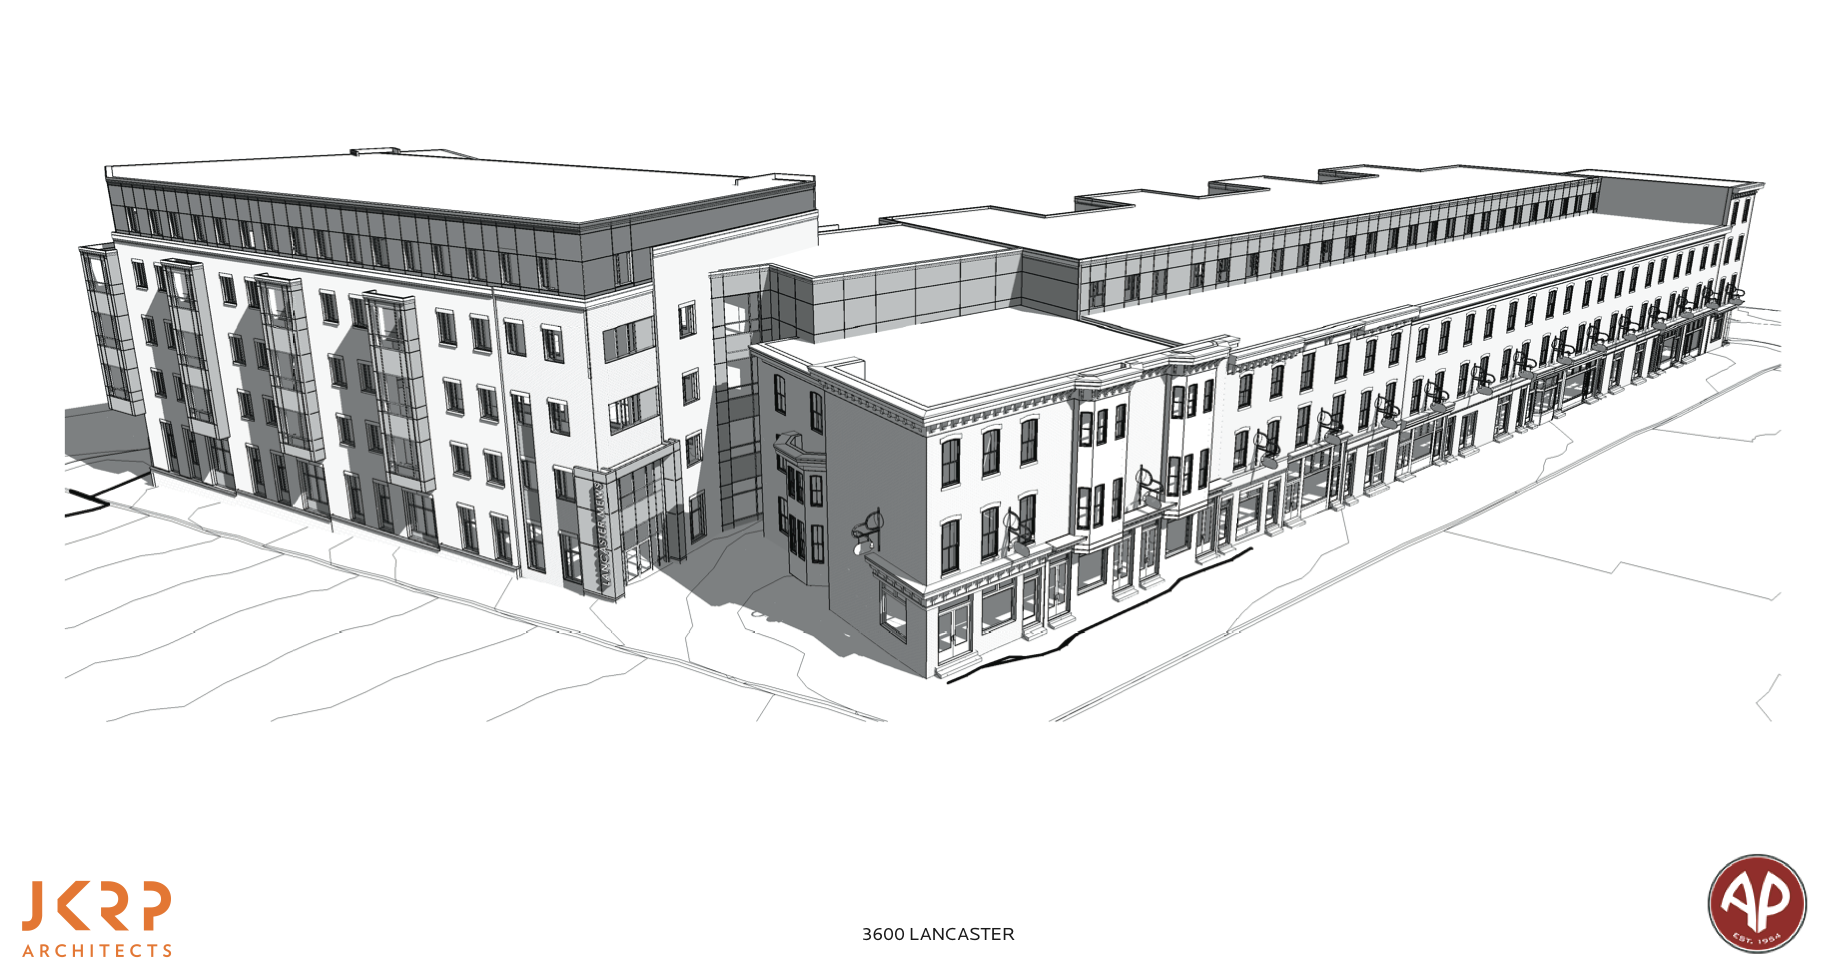 Conceptual plan for Lancaster Mews presented at Architectural Committee, May 2016